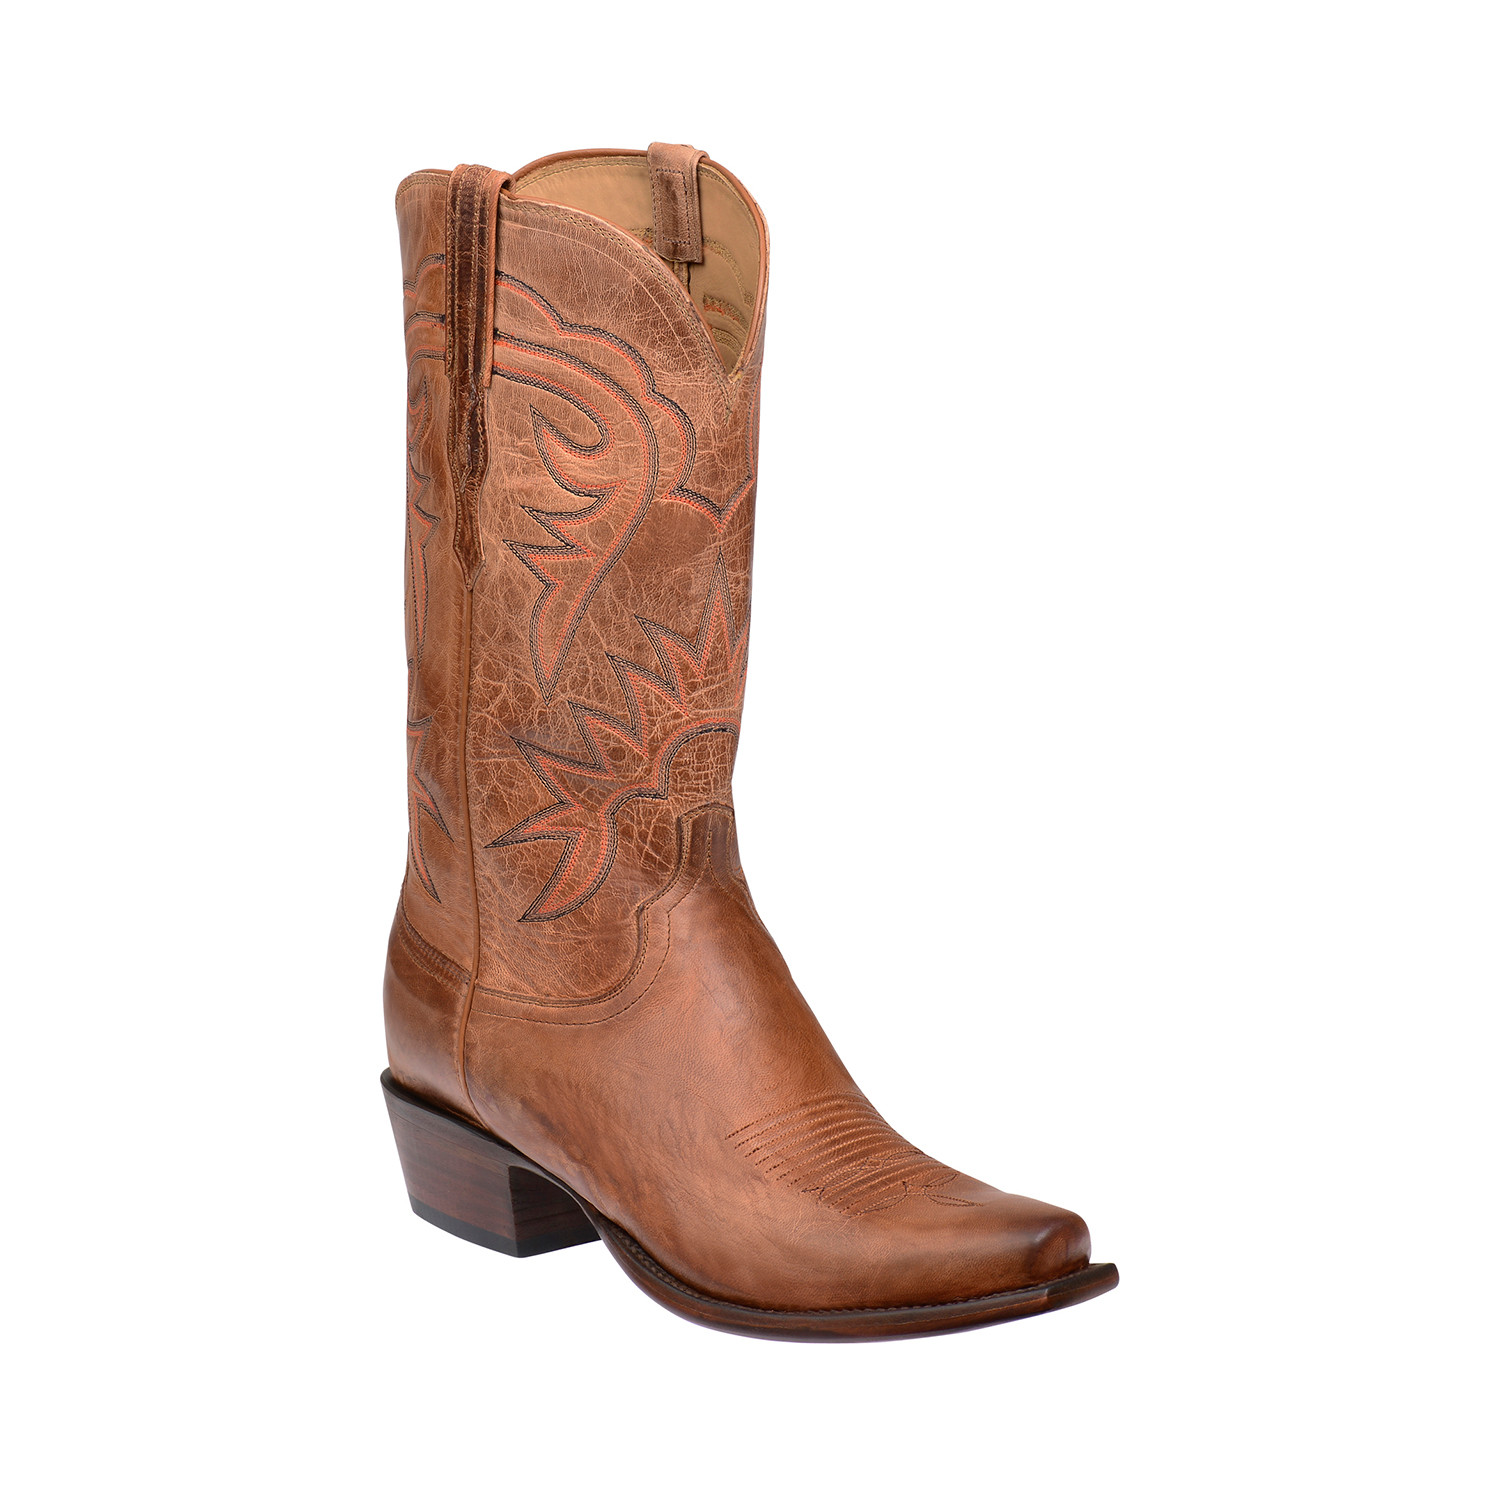 Goat Skin Square Toe Western Boot // Tan // EE (Wide) (US: 9 ...